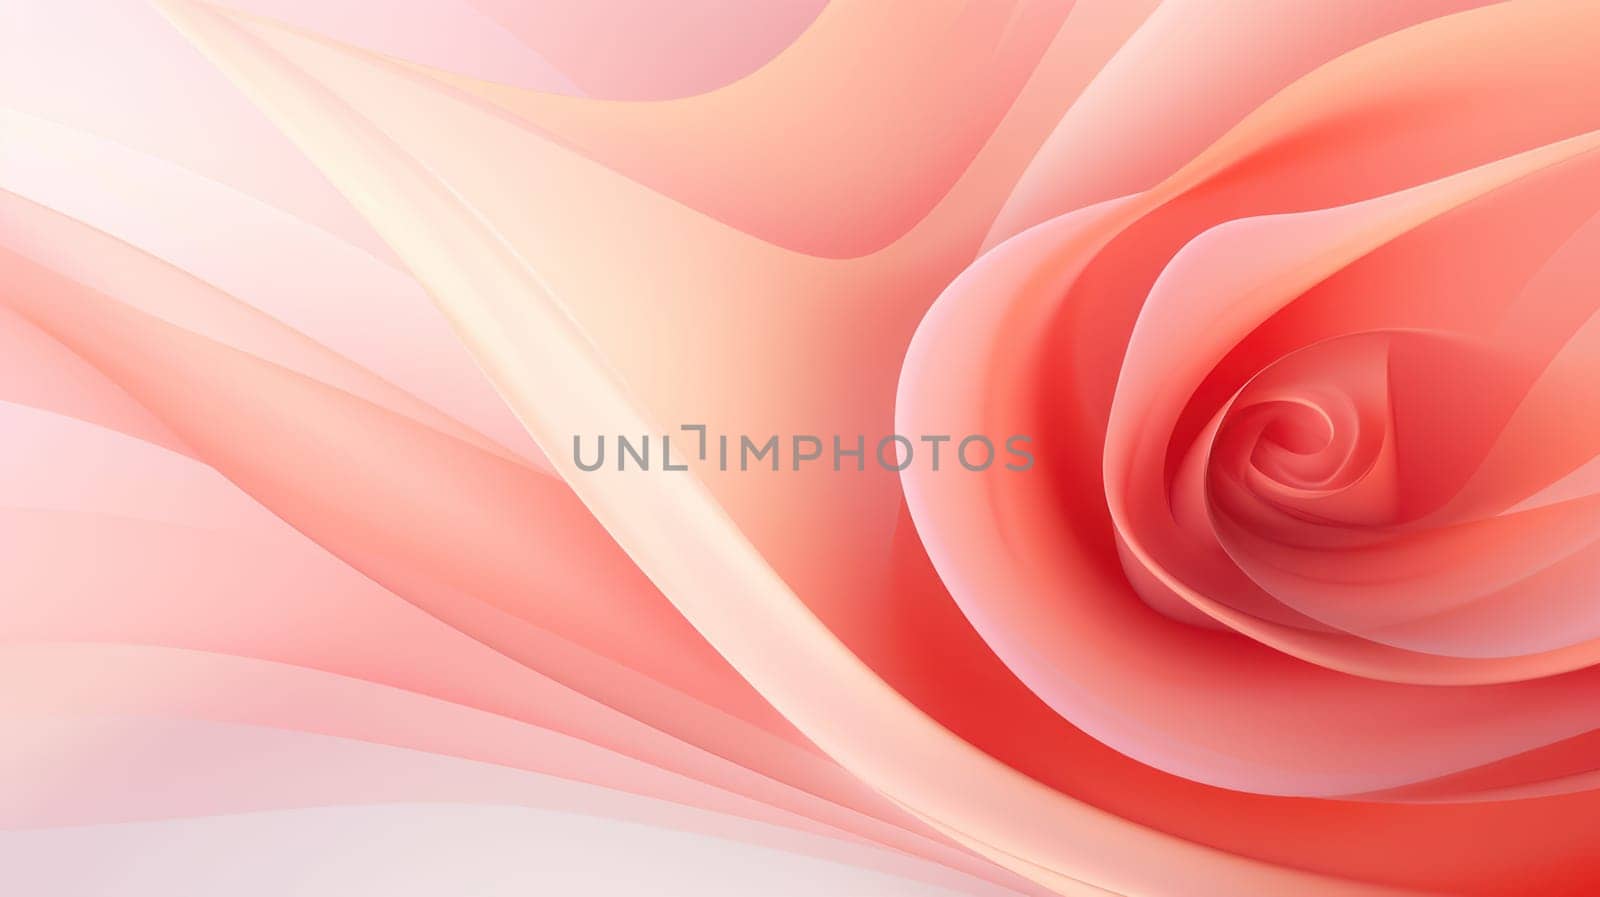 Abstract Floral Beauty: Delicate Rose Petal Romance on Pink Background by Vichizh